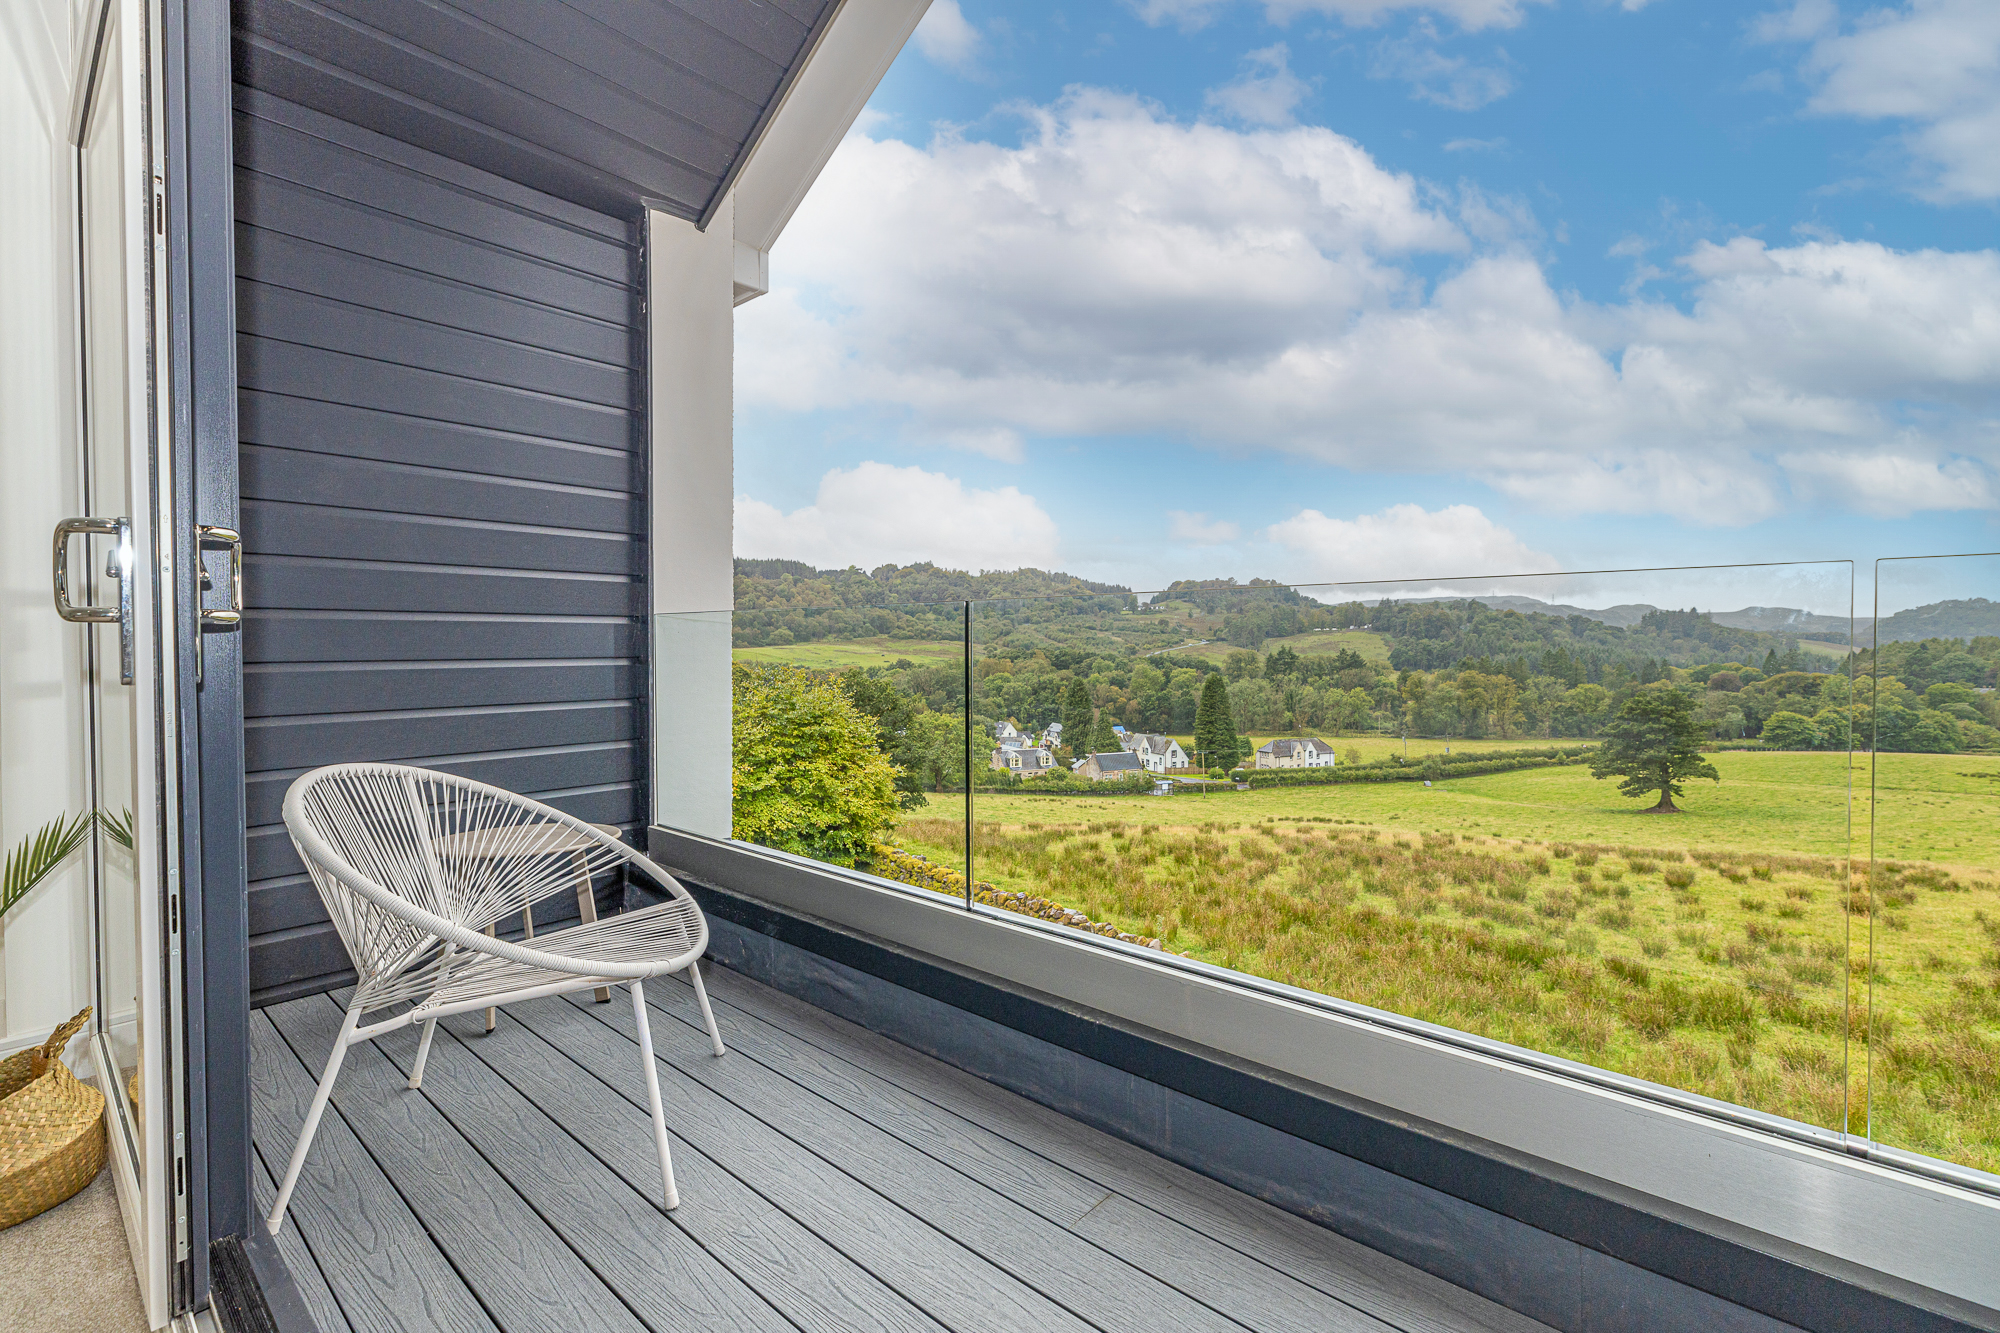 enjoy local scenery from the comfort of your own home at Campsie Dene Lane near Stirling